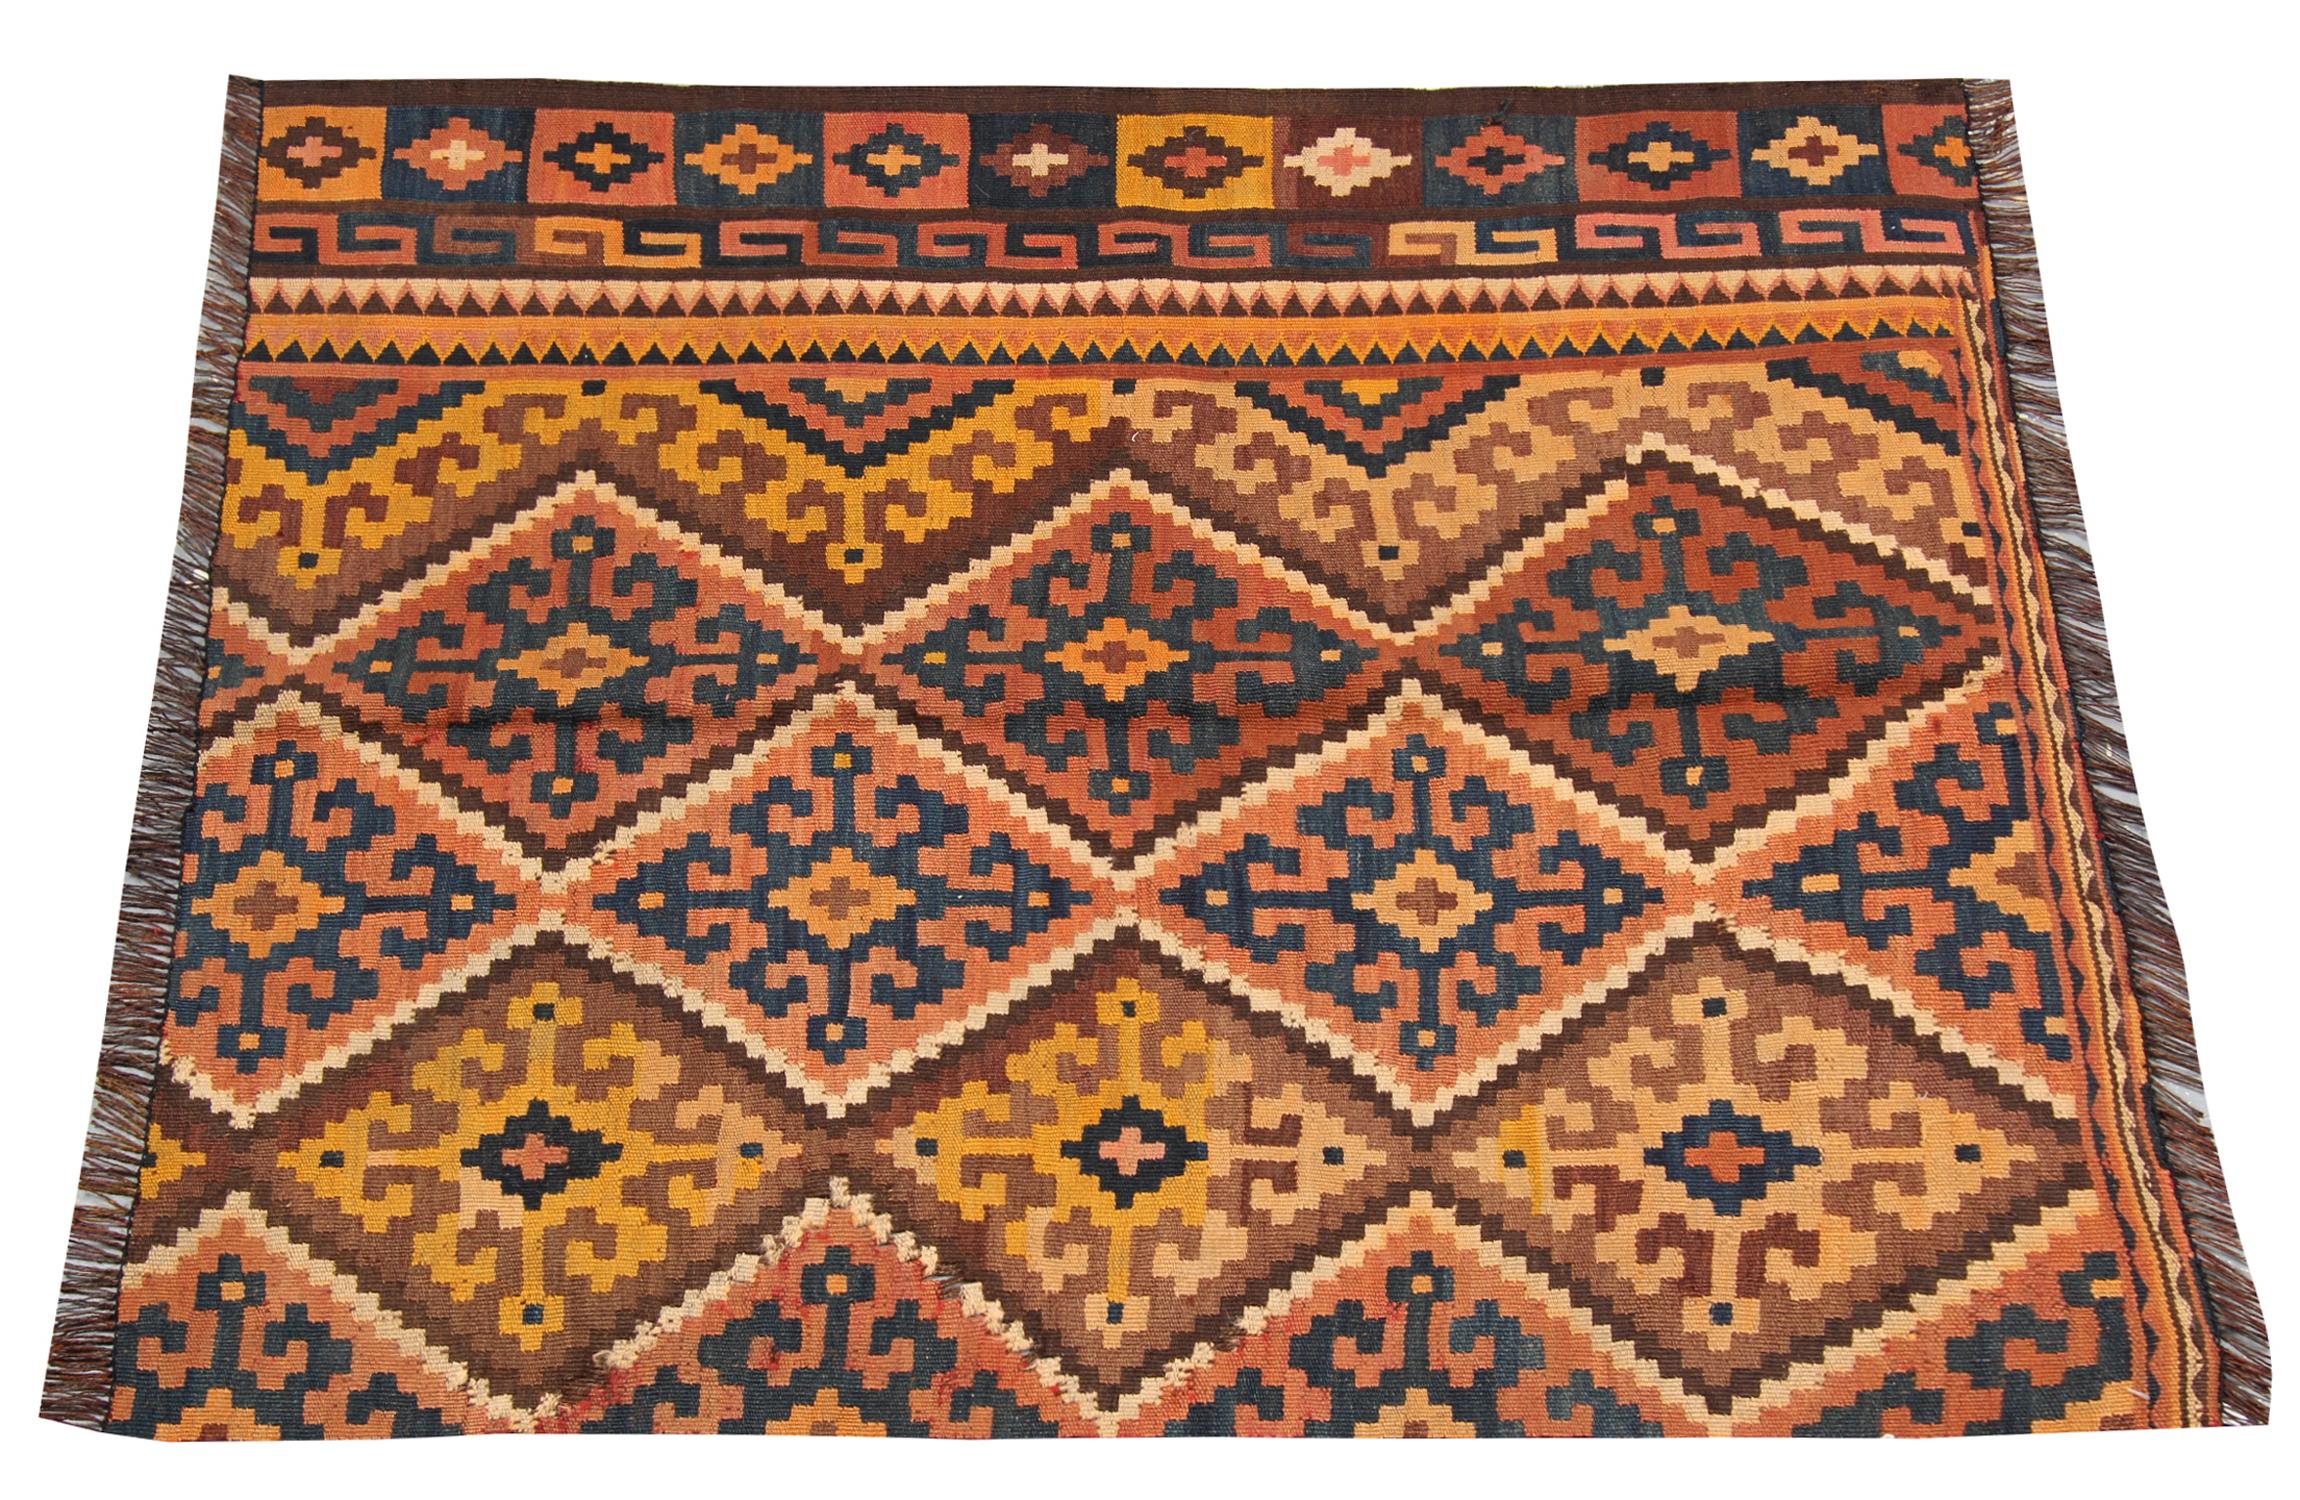 Orange, deep blue and brown are the main colours in this fine wool rug. Featuring a repeating pattern hook motif design that covers the bottom half of this piece with a one-sided border with zig-zag and tribal motifs in a repeating pattern. This